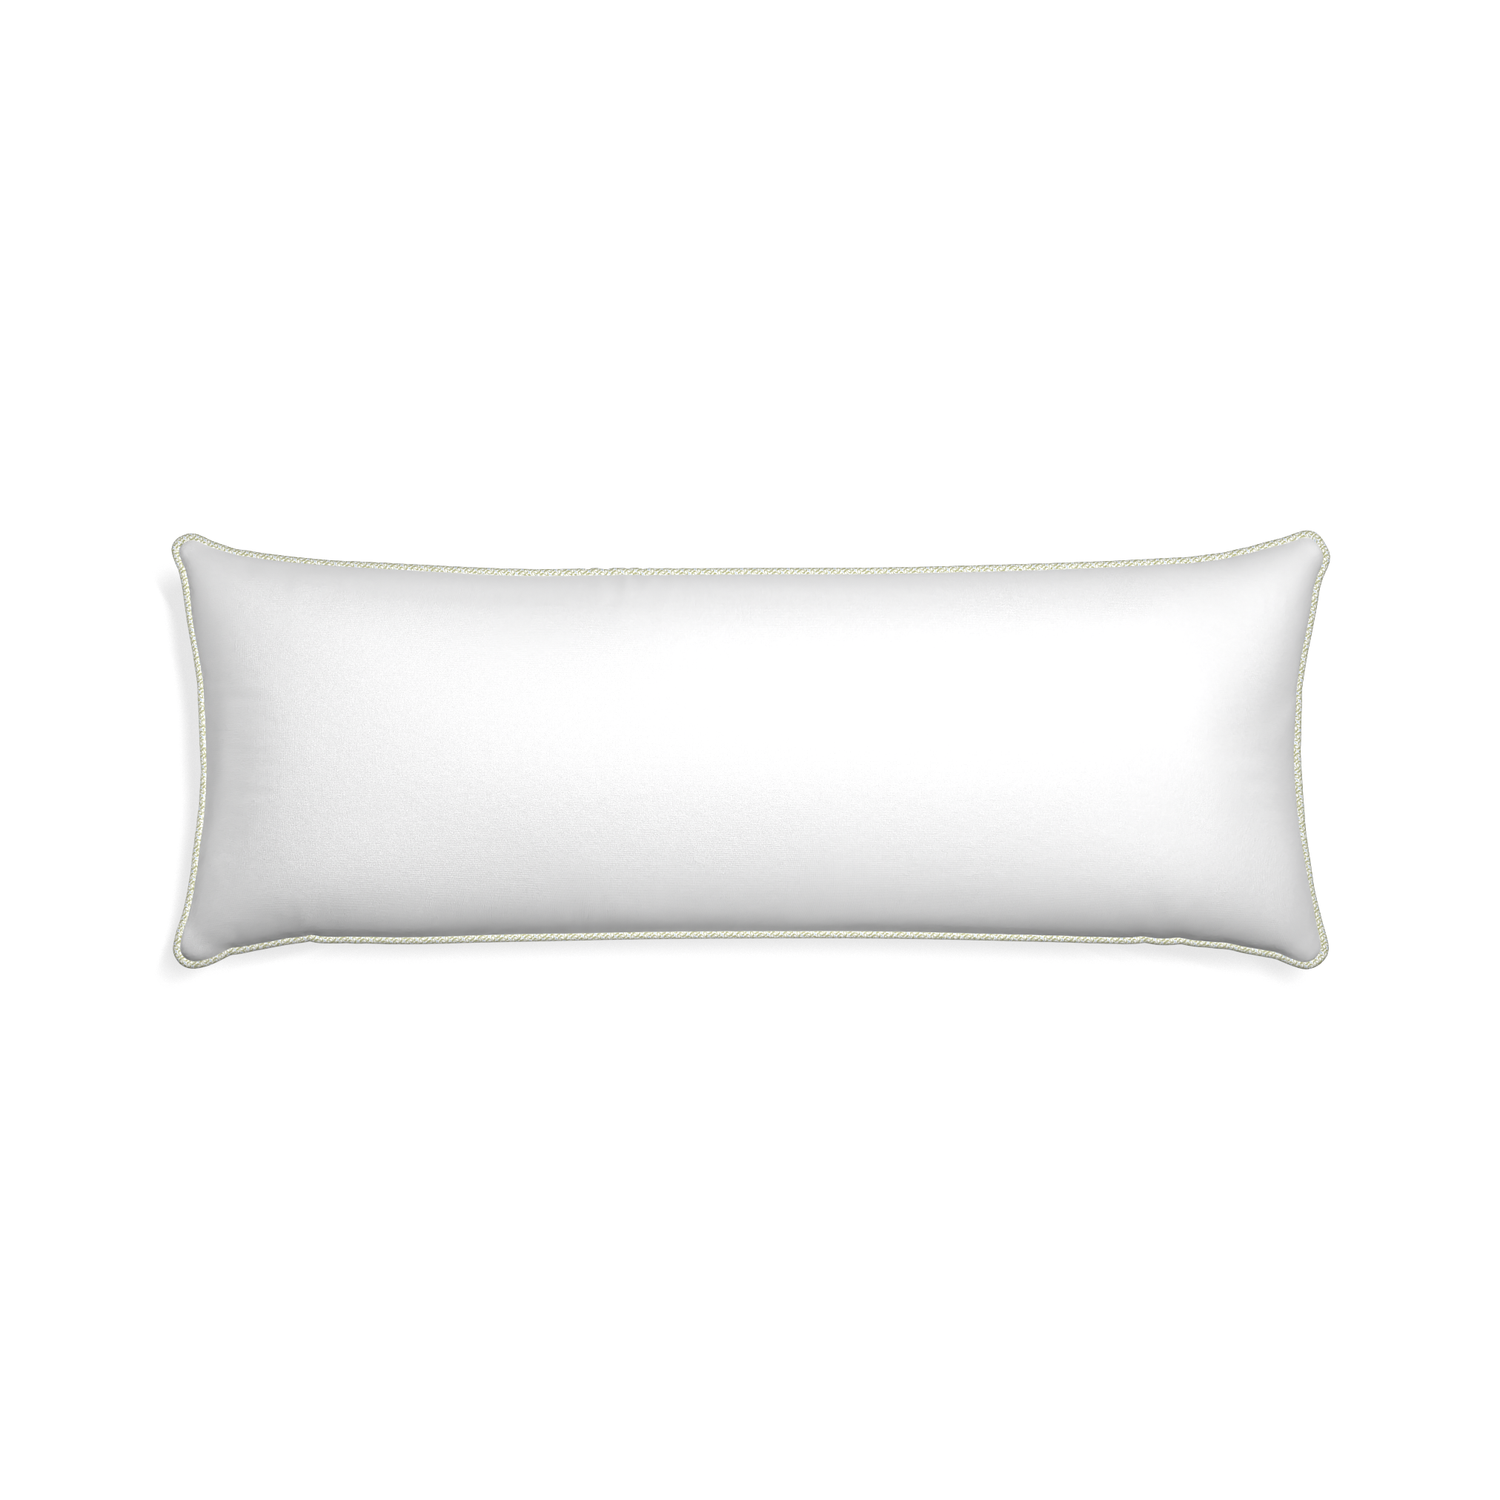 Xl-lumbar snow custom pillow with l piping on white background